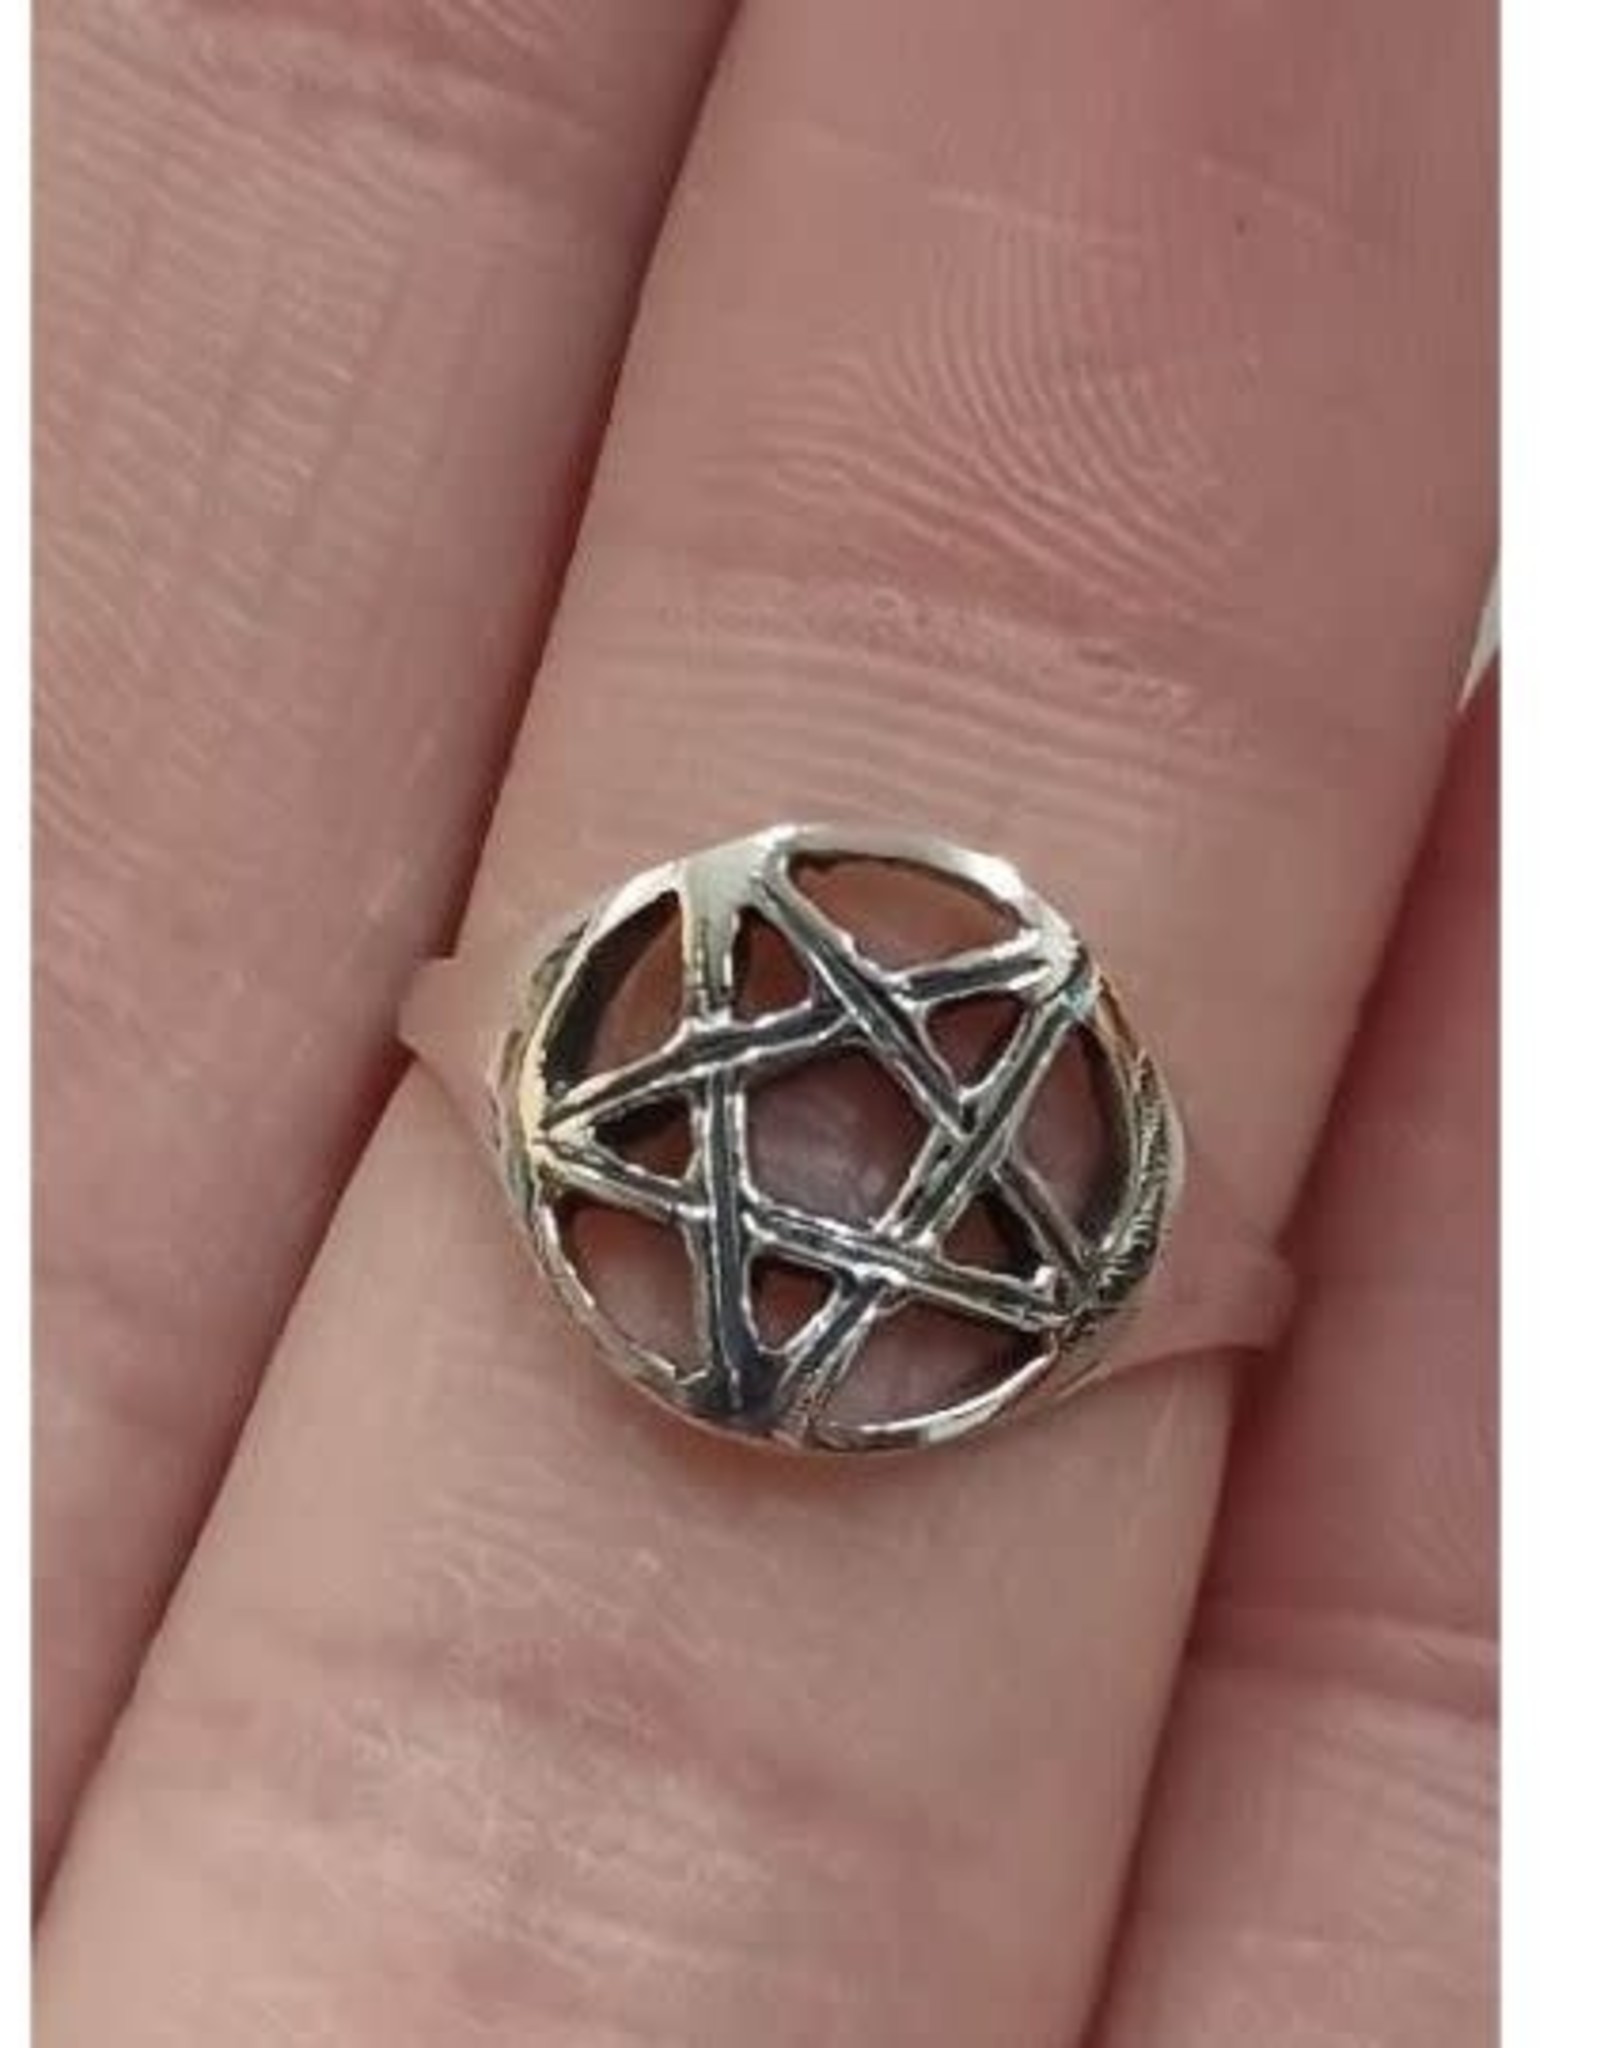 Pentacle Ring - Size 6 Sterling Silver